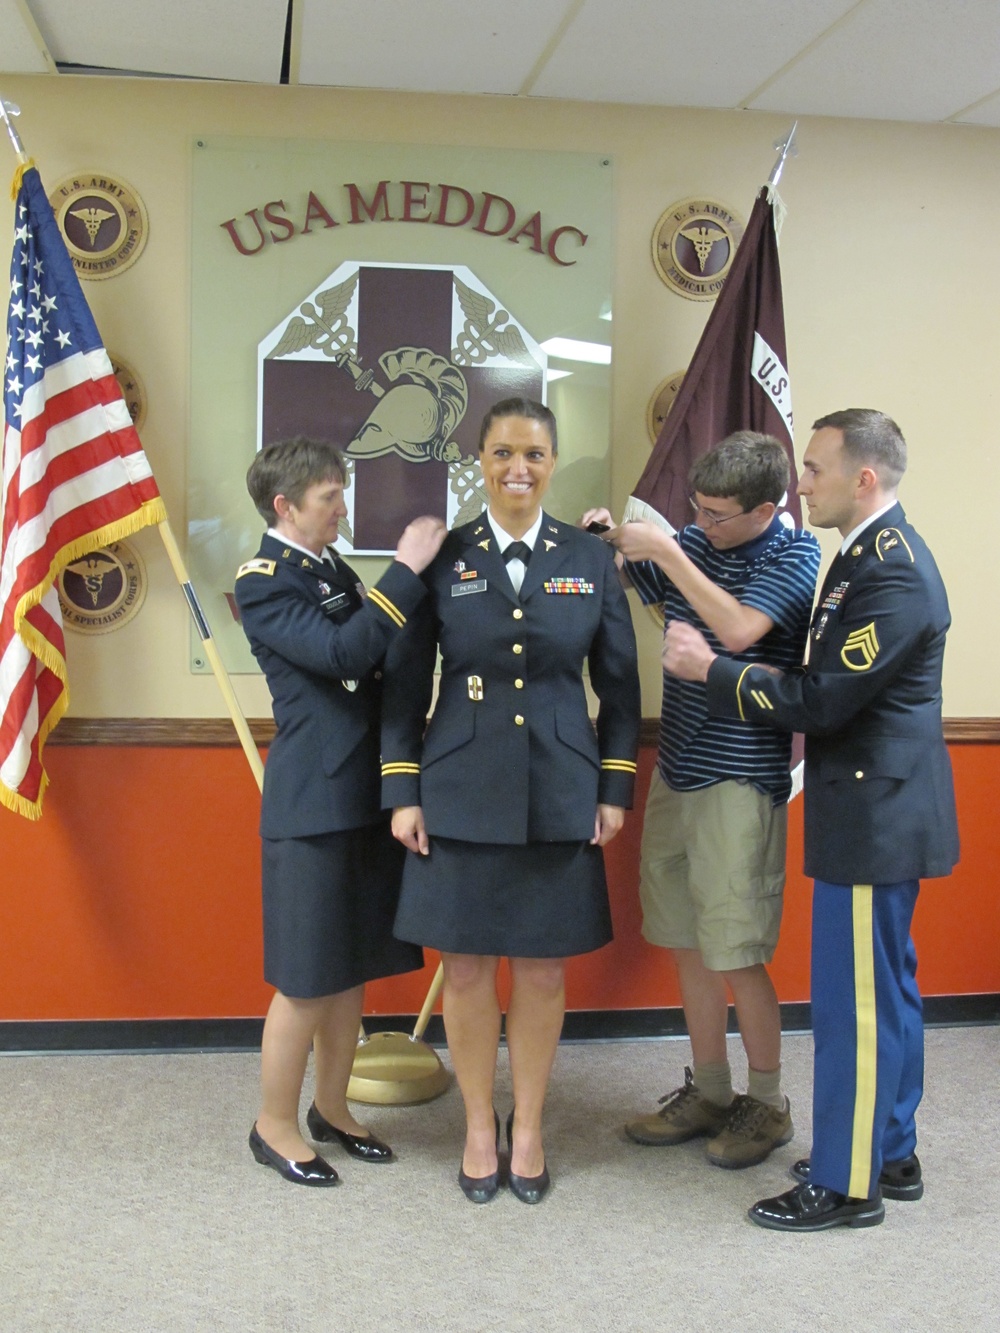 Capt. Tabatha Pepin's promotion to major in the US Army